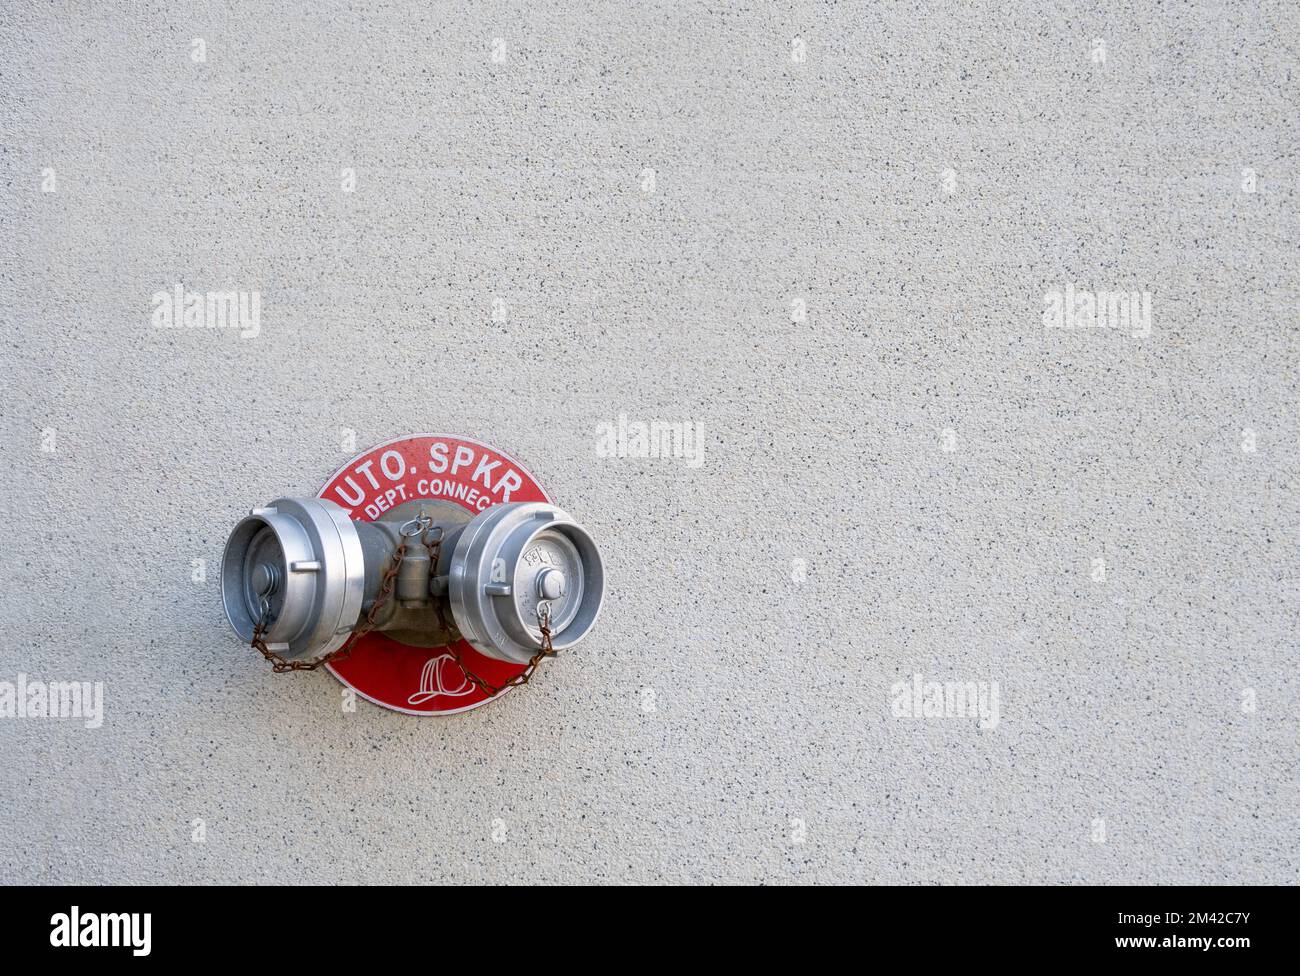 Standpipe on wall. Fire water outlet. Fire hydrant on the wall Stock Photo